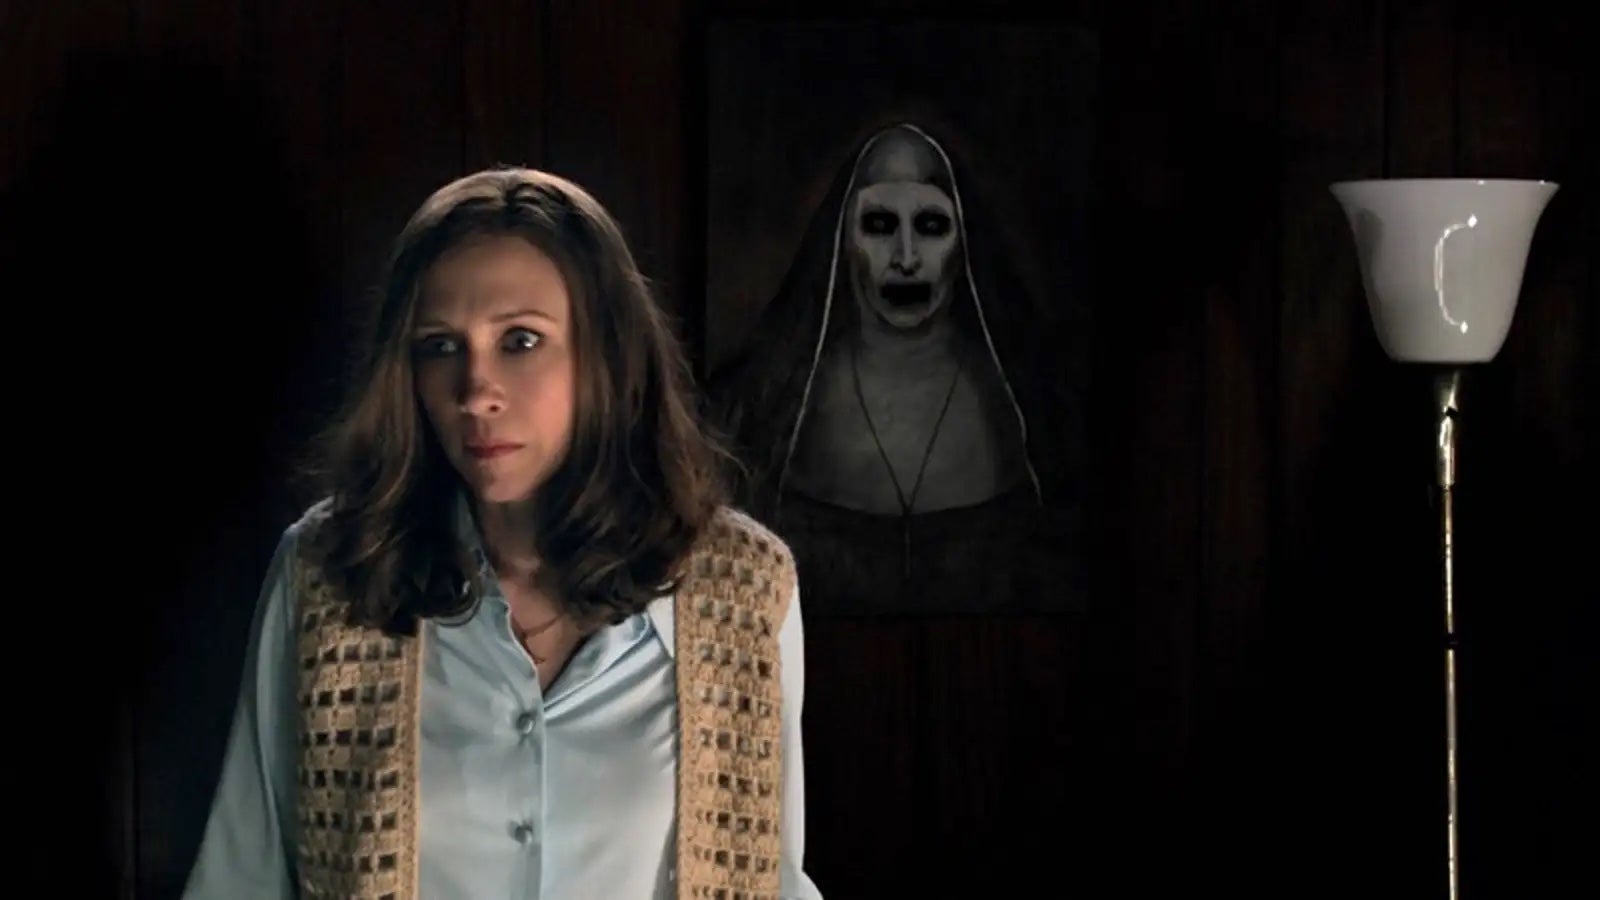 The Conjuring 2 (Image: Warner Bros. Pictures)